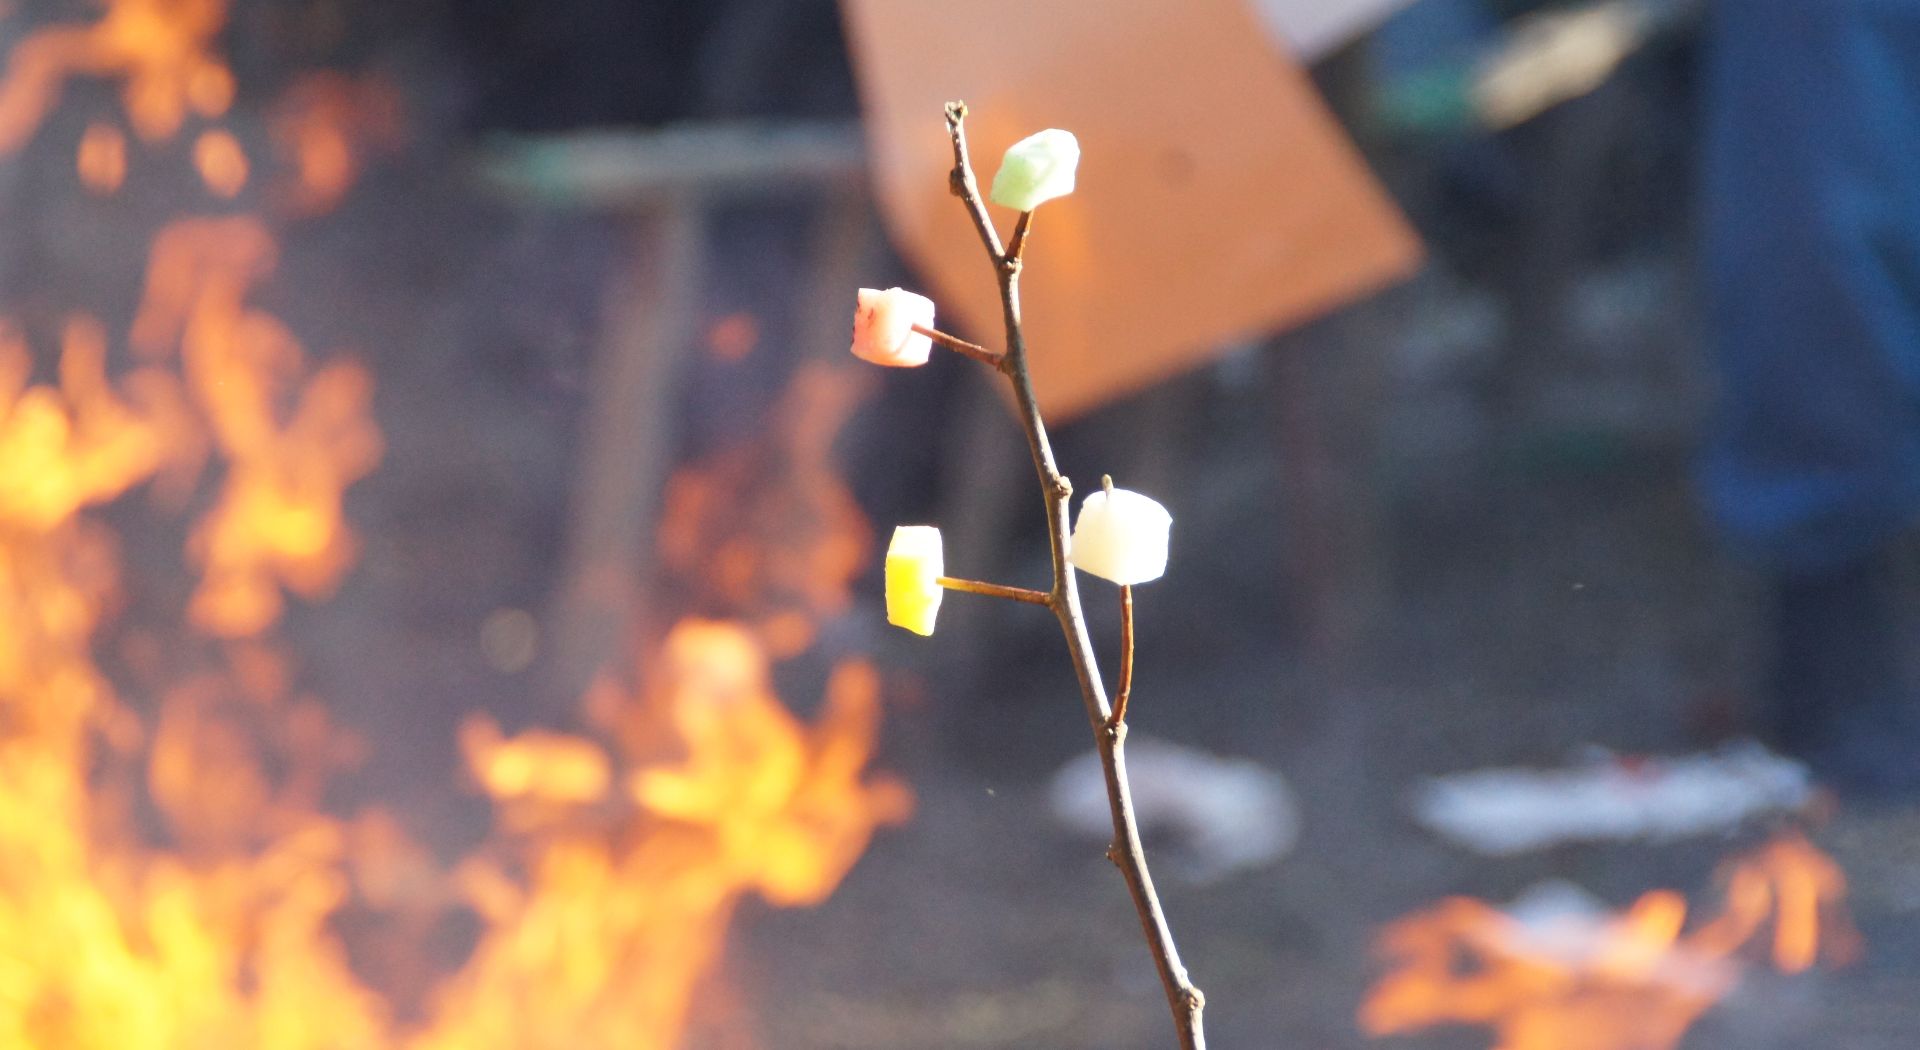 chunks of mochi on a stick in front of a flame